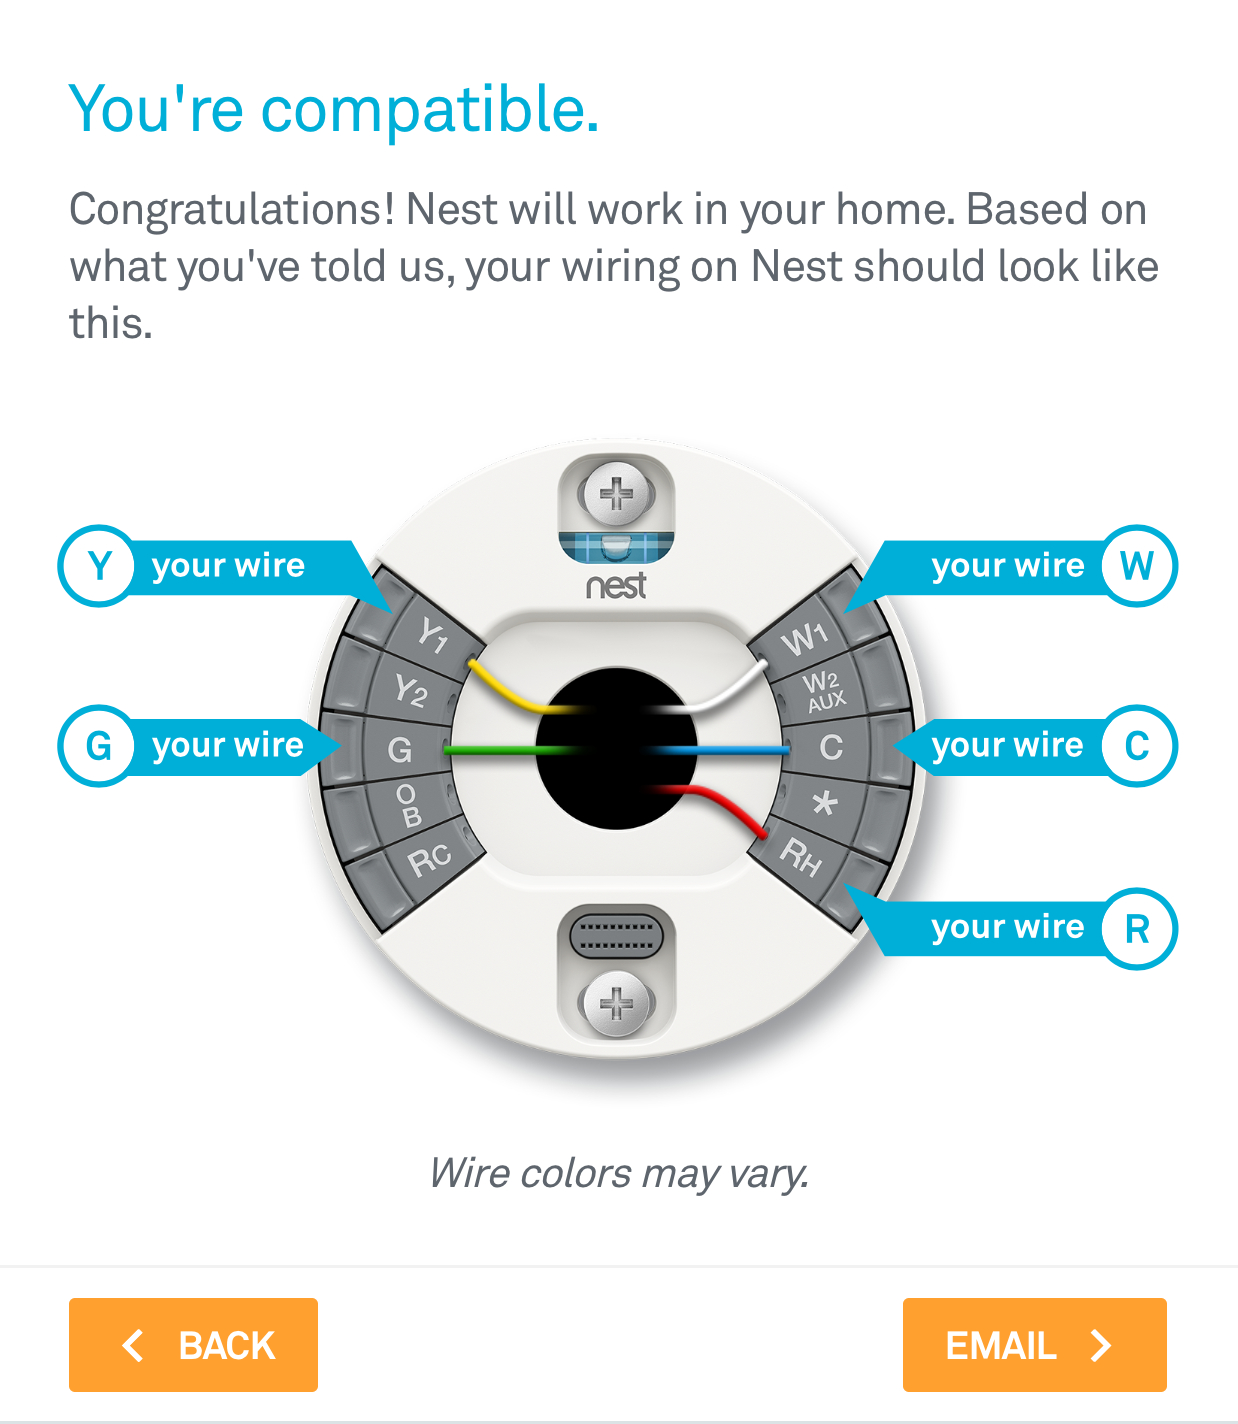 How To: Install The Nest Thermostat | The Craftsman Blog - Nest Thermostat Wiring Diagram